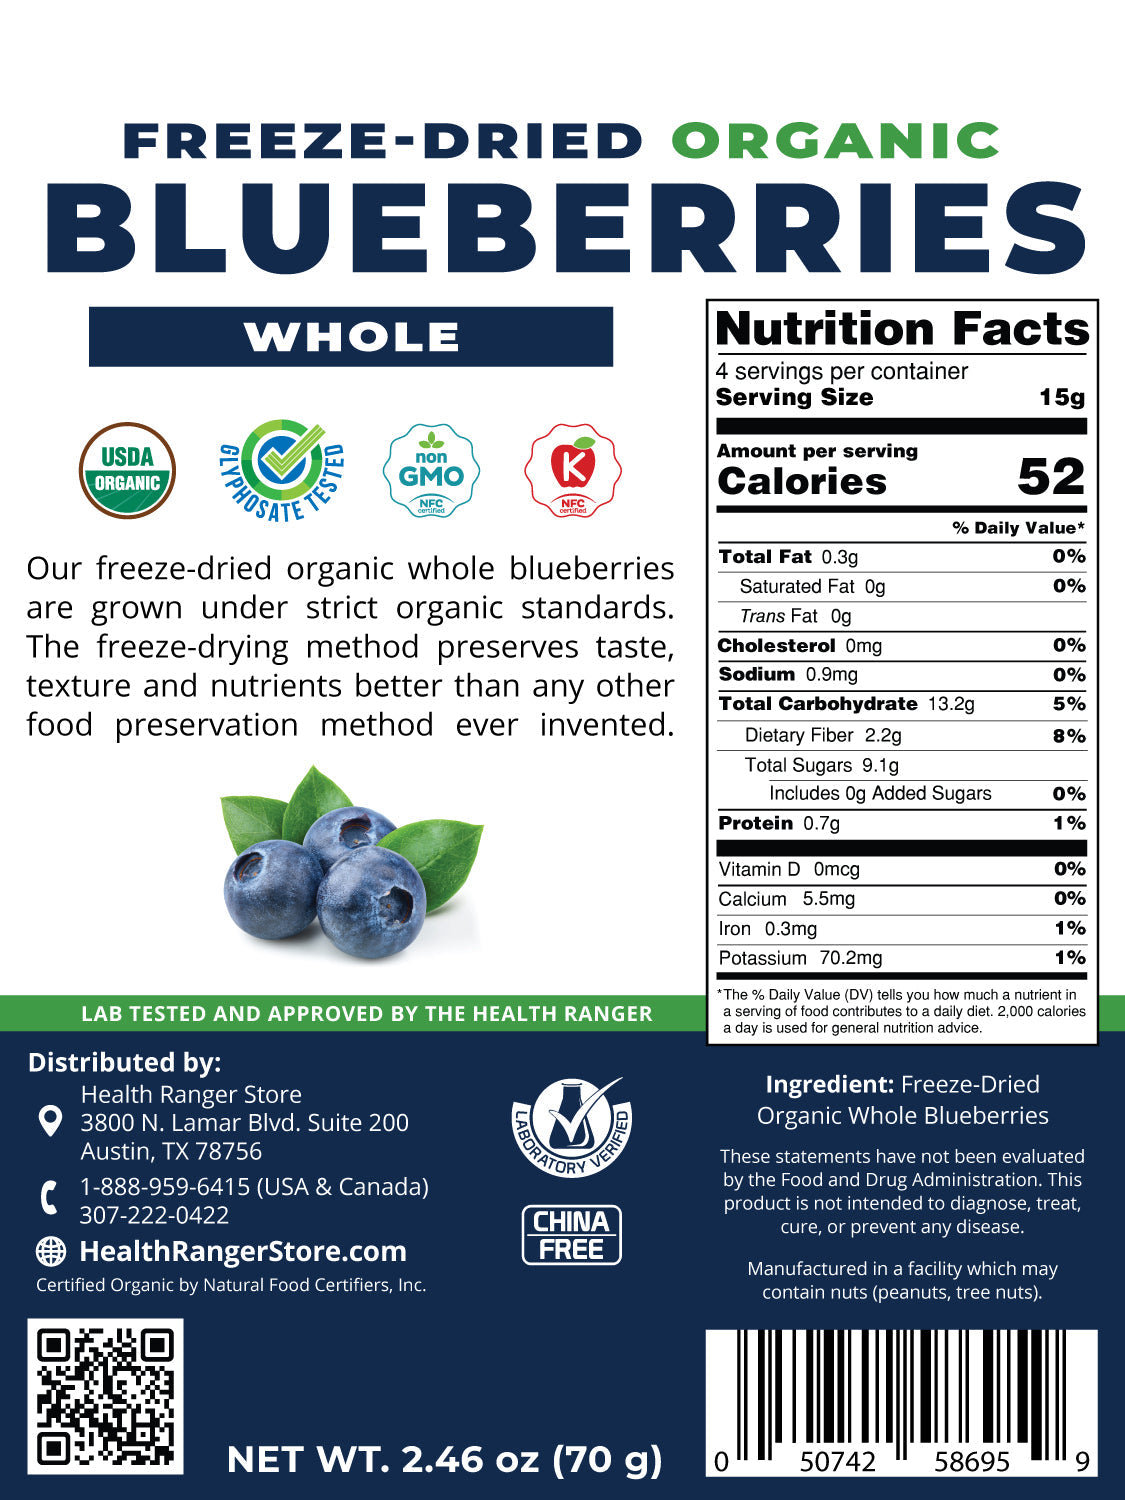 Freeze-Dried Organic Whole Blueberries 2.46 oz (70g) (6-Pack)